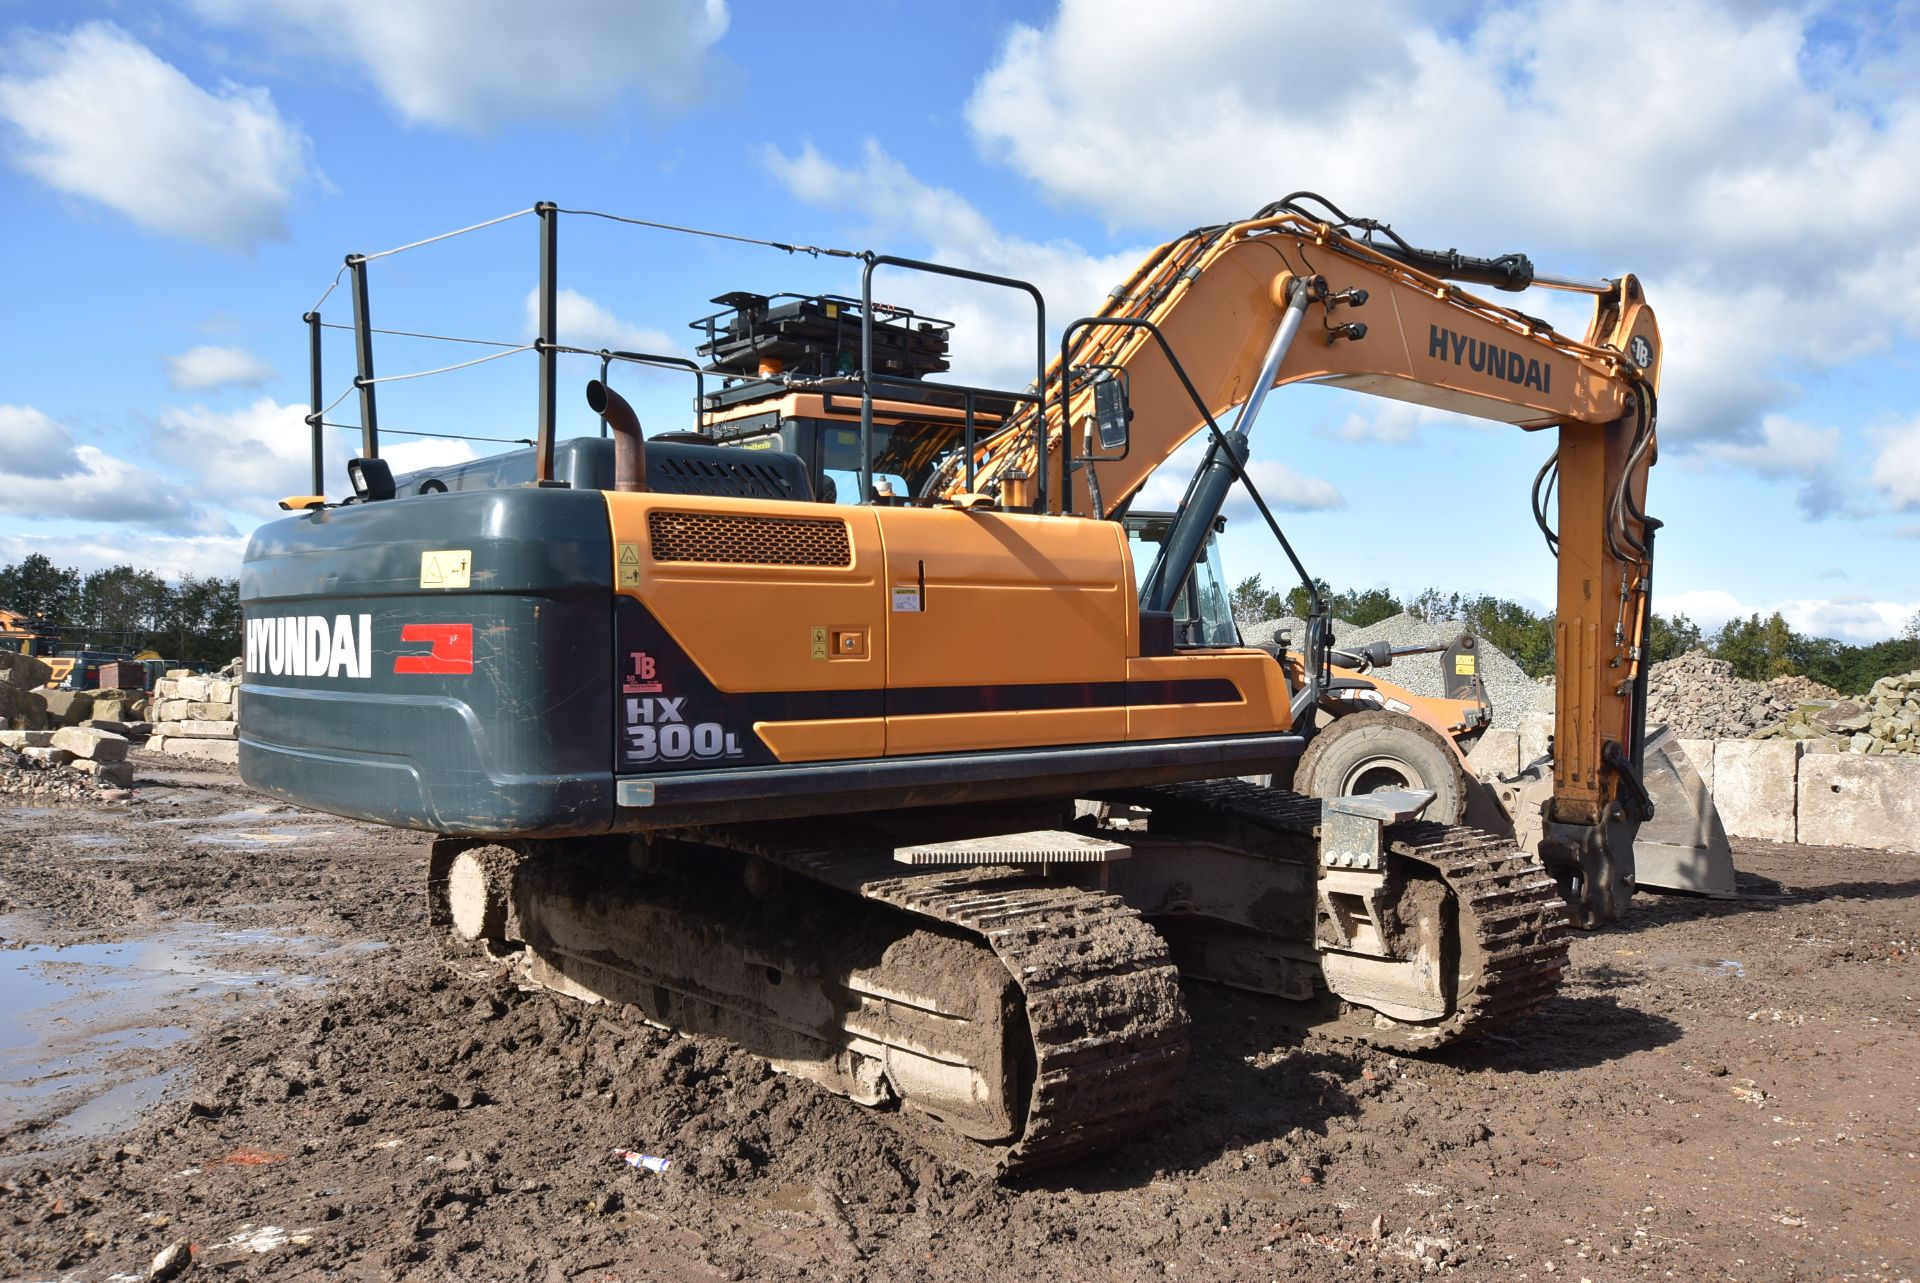 Hyundai HX300L 30T TRACKED EXCAVATOR, VIN HHKHK801TH0000492, year of manufacture 2017, indicated - Image 4 of 12